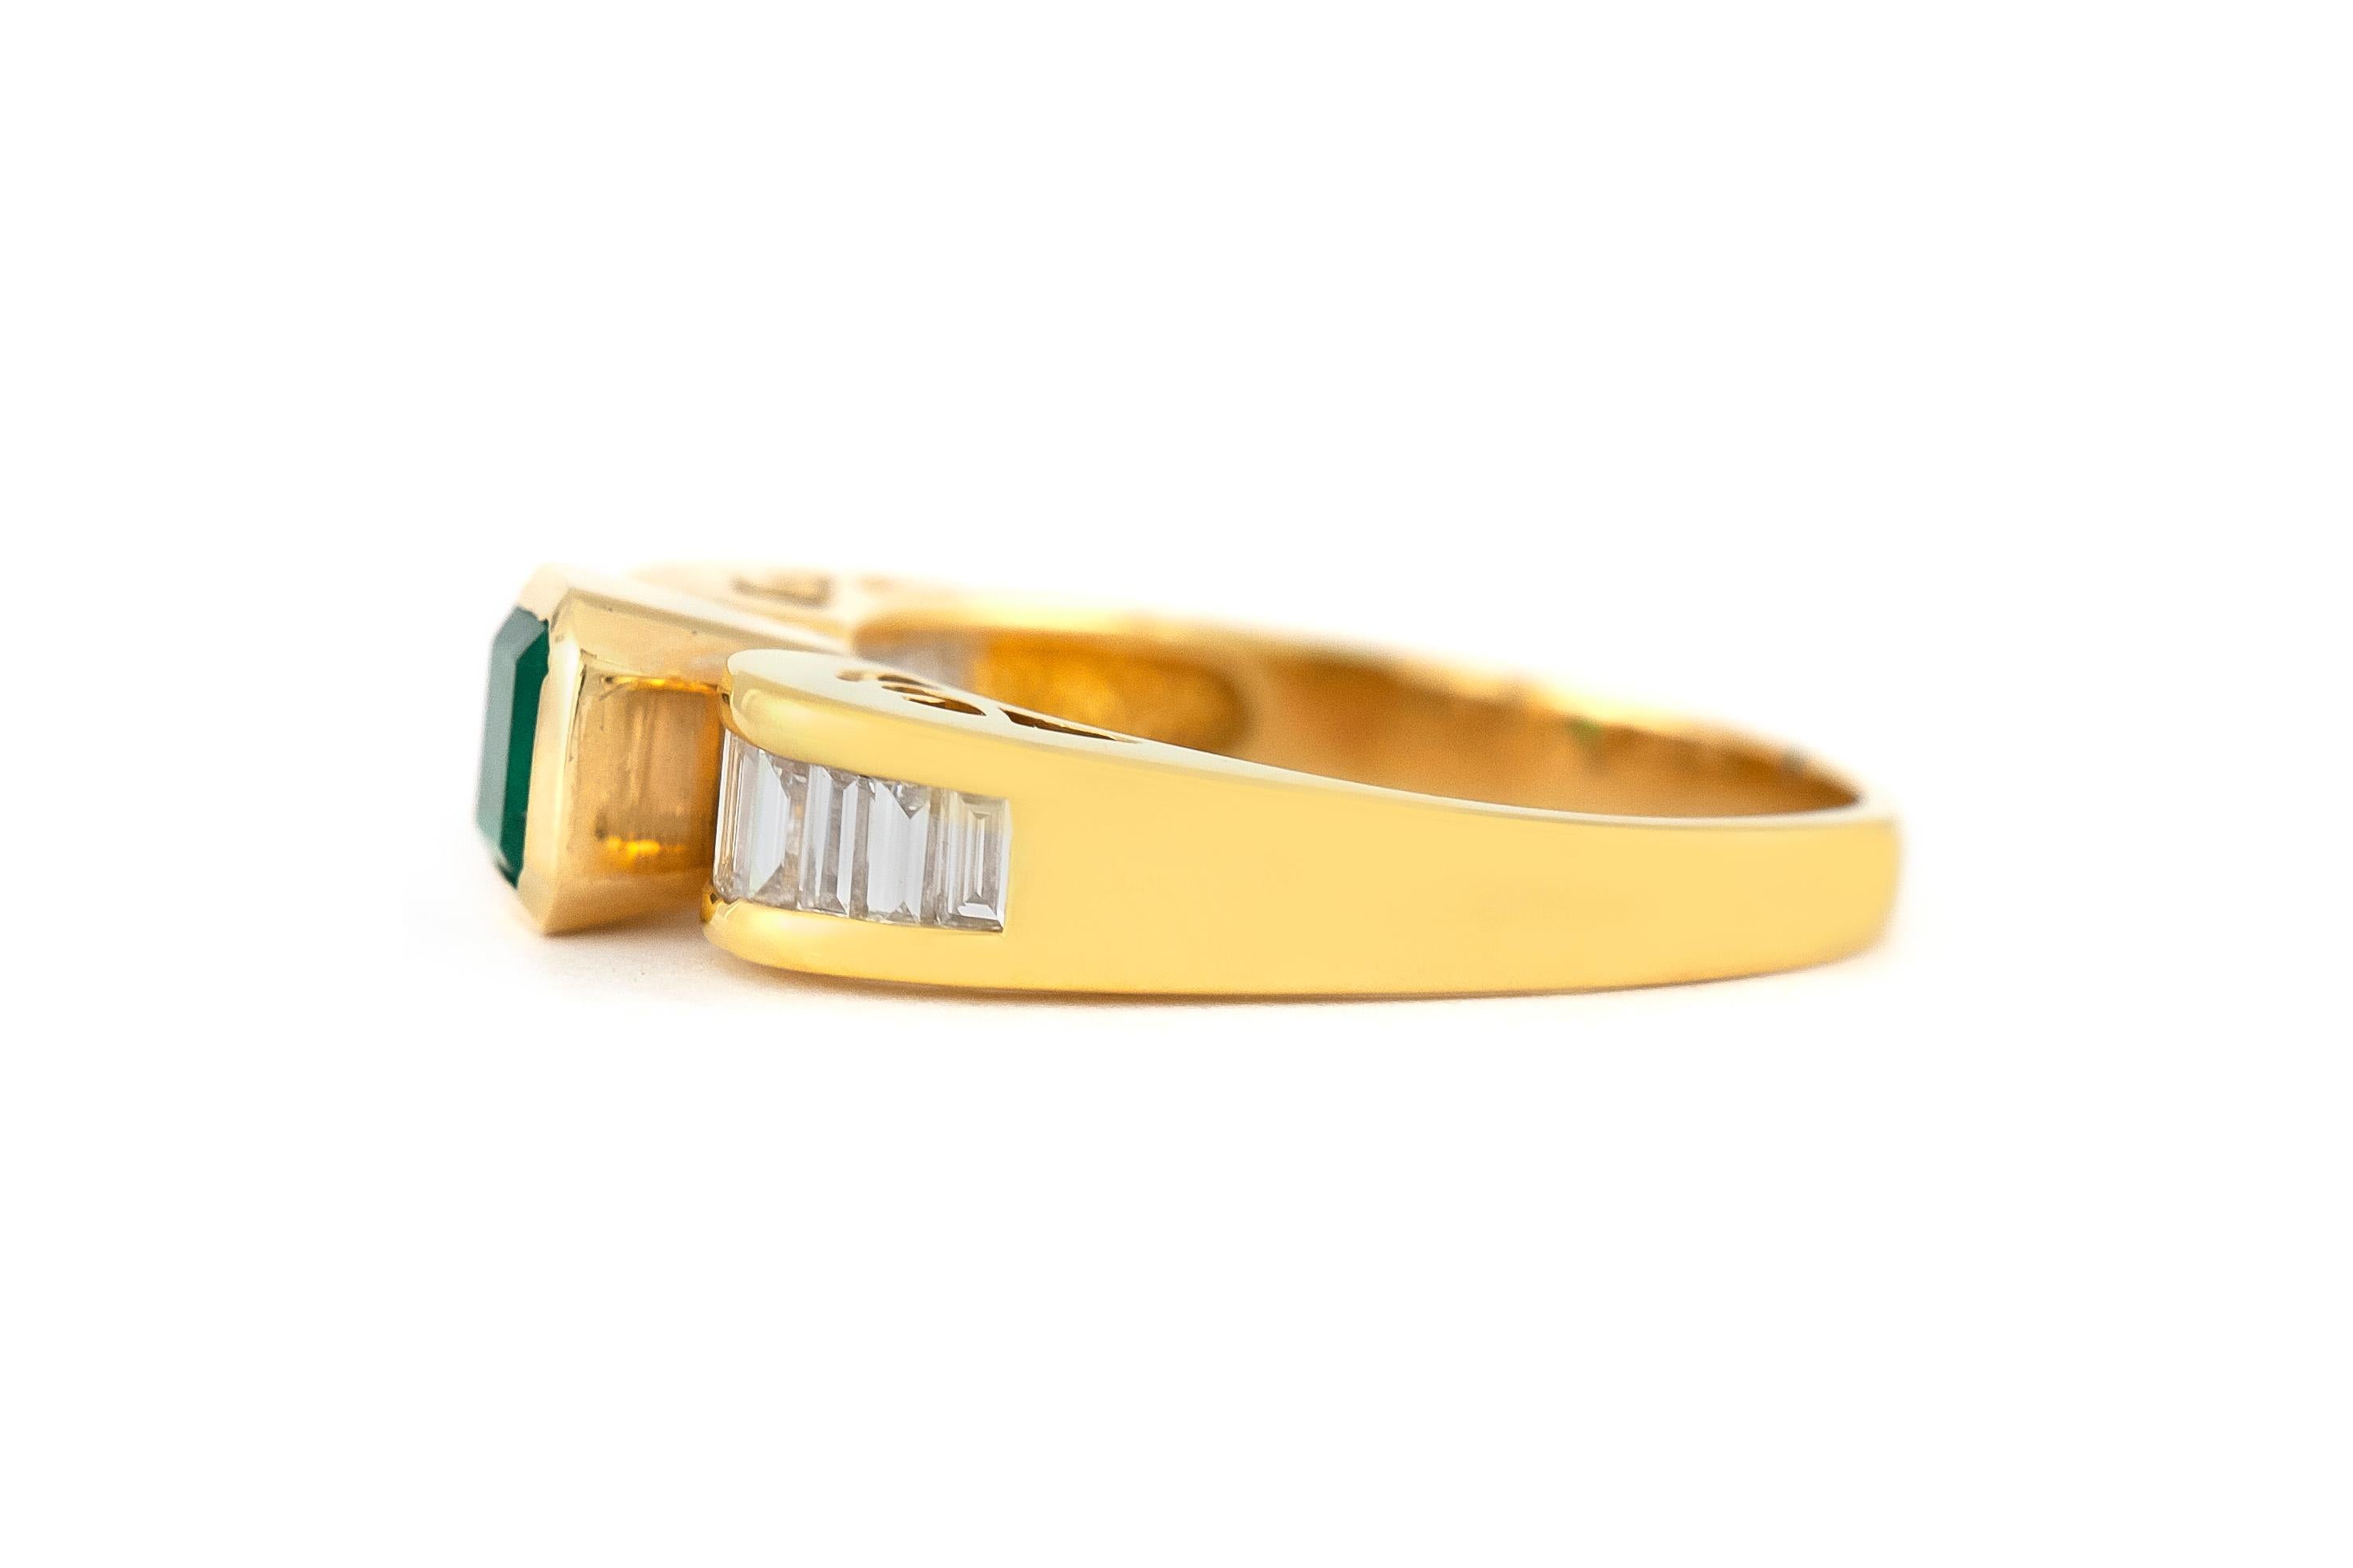 The ring is finely crafted in 18k yellow gold with center emerald weighing approximately total of 0.60 carat and diamonds weighing approximately total of 0.70 carat.
Circa 1970